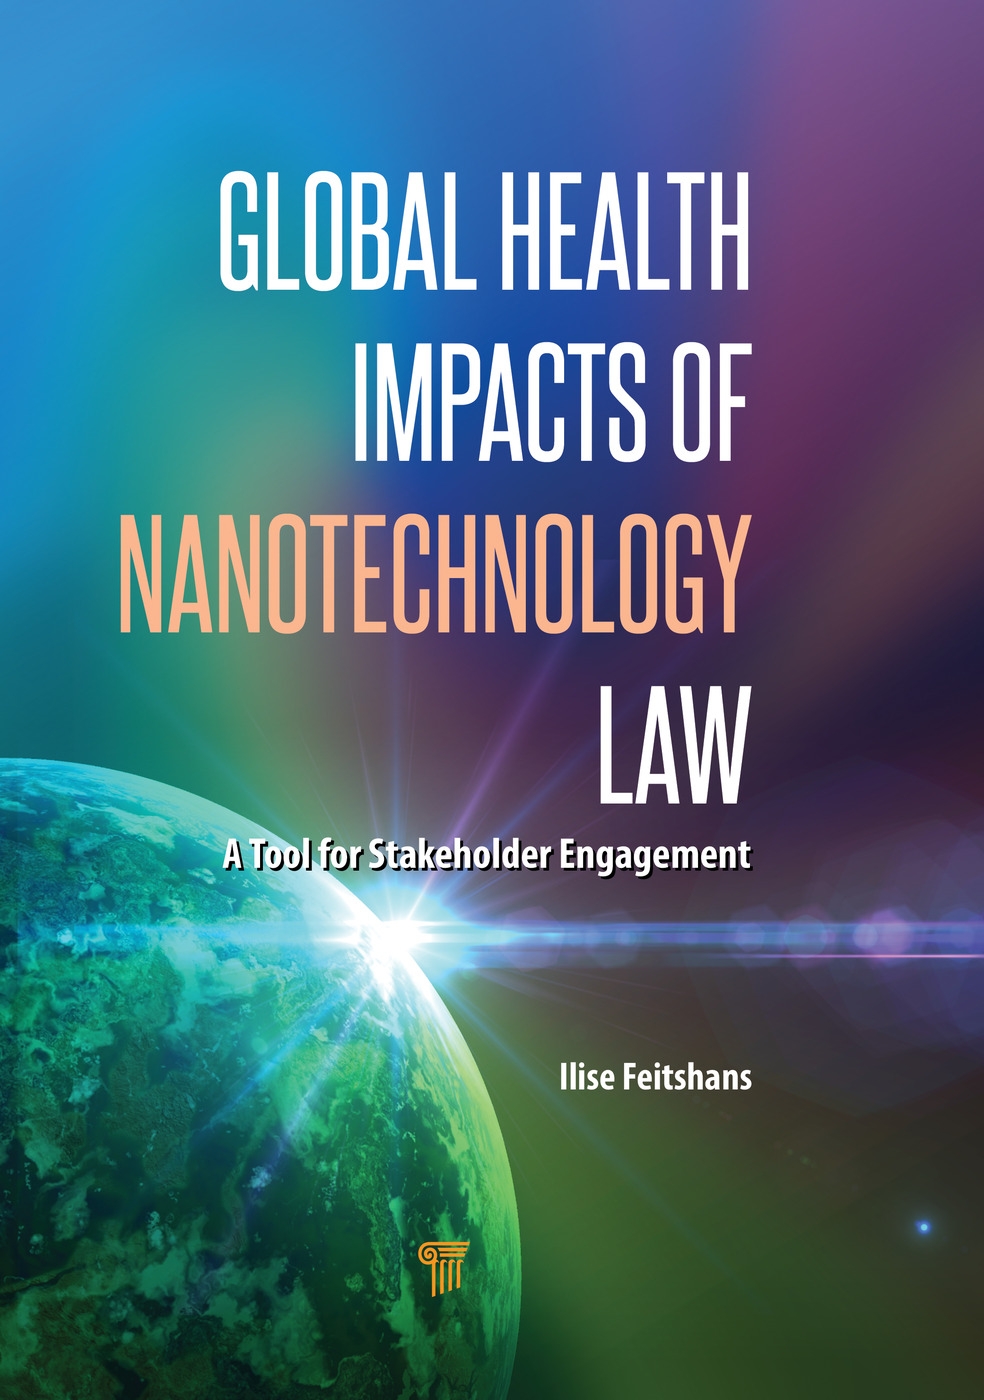 Global Health Impacts of Nanotechnology Law: A Tool for Stakeholder Engagement